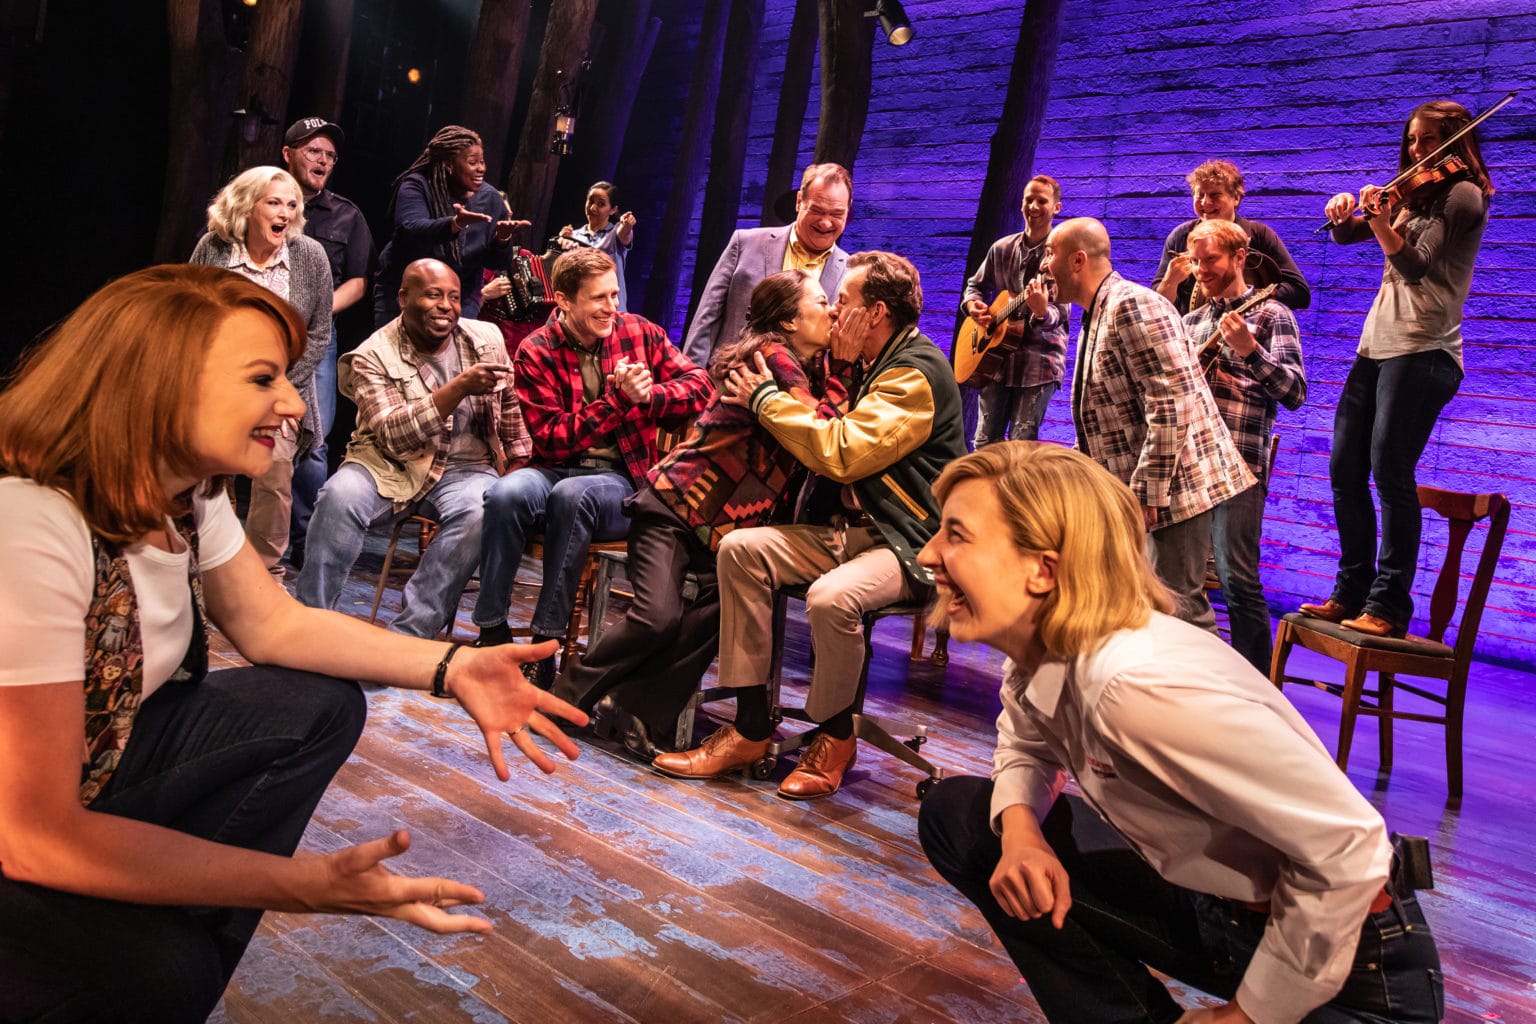 Review Come From Away at the Kennedy Center. Much needed catharsis